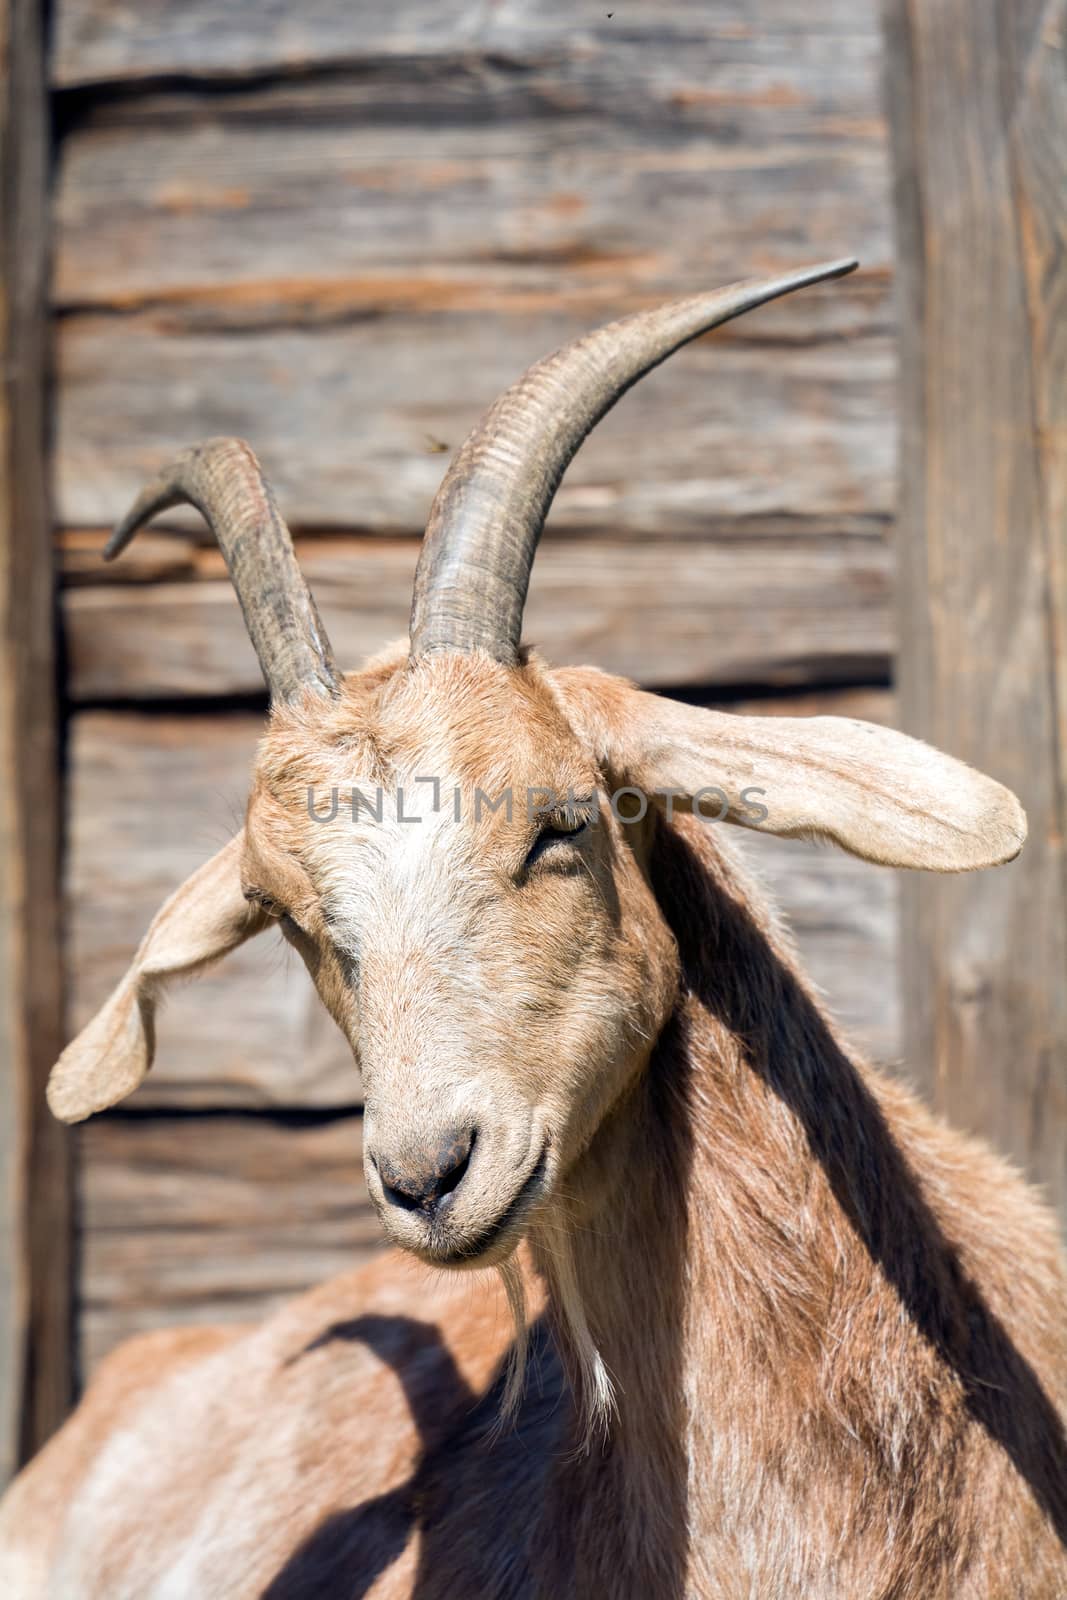 The head of a white goat with background blur